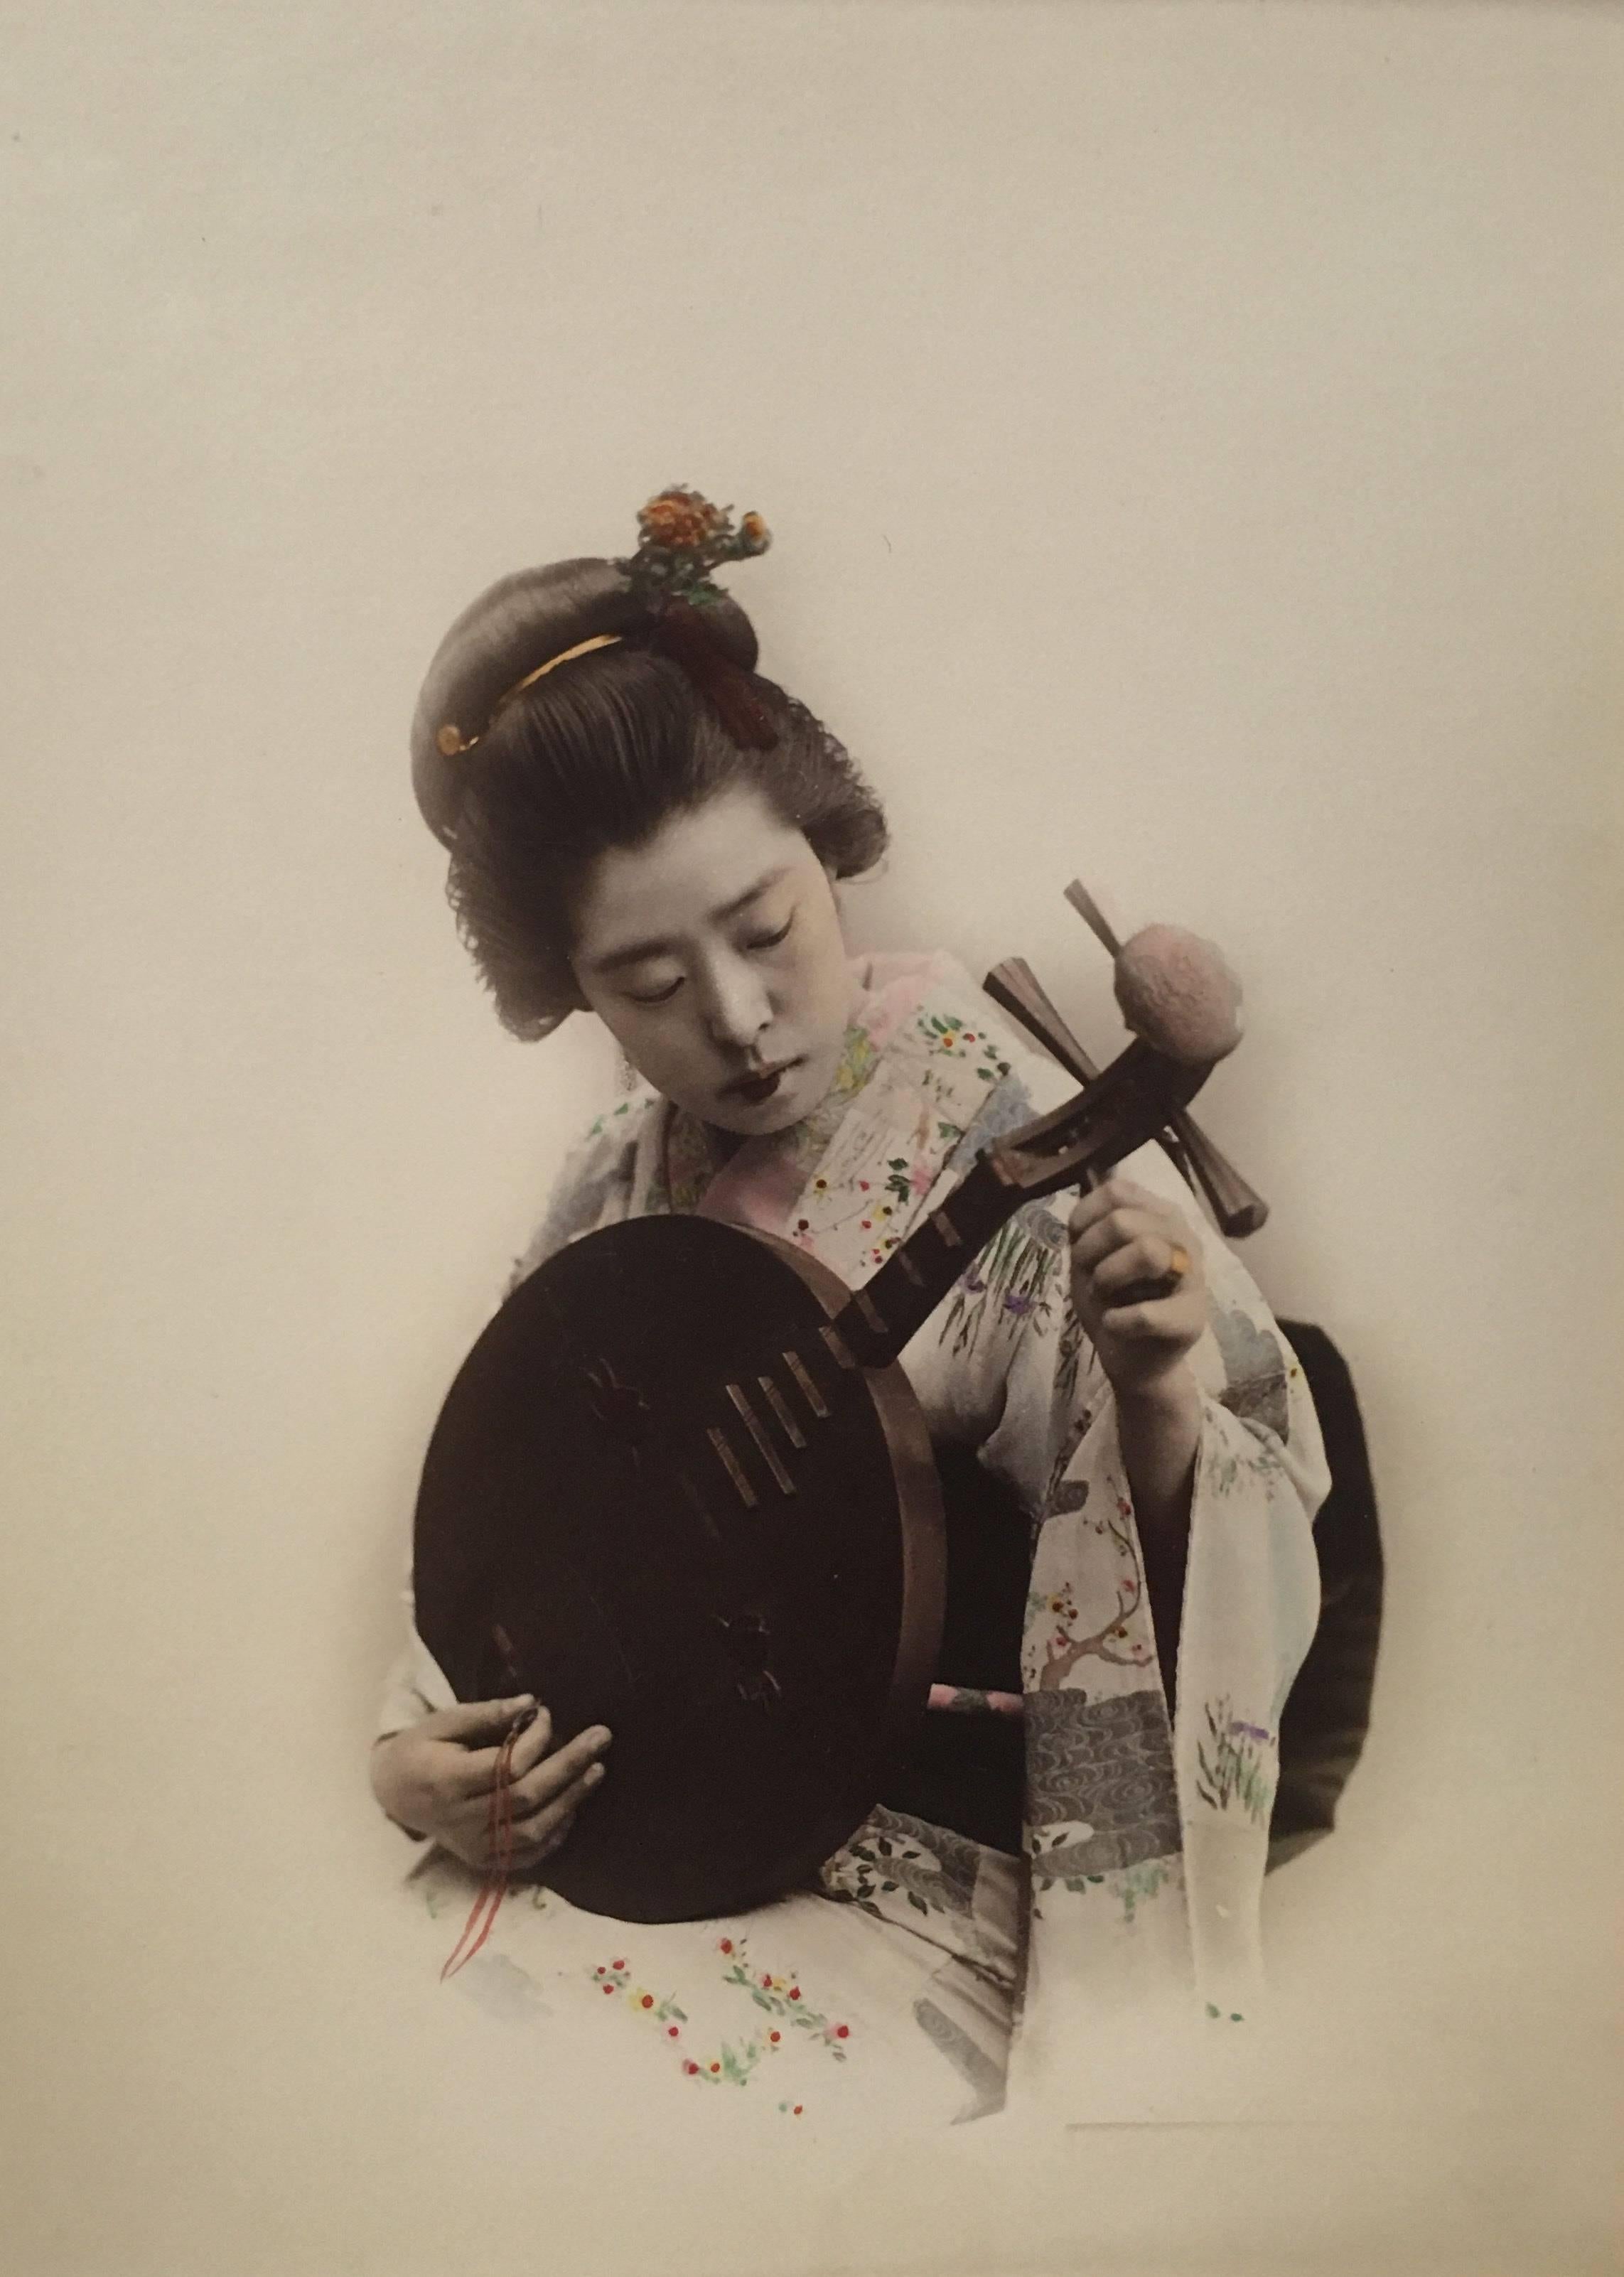 Unknown Portrait Photograph - Japanese Woman (with instrument)